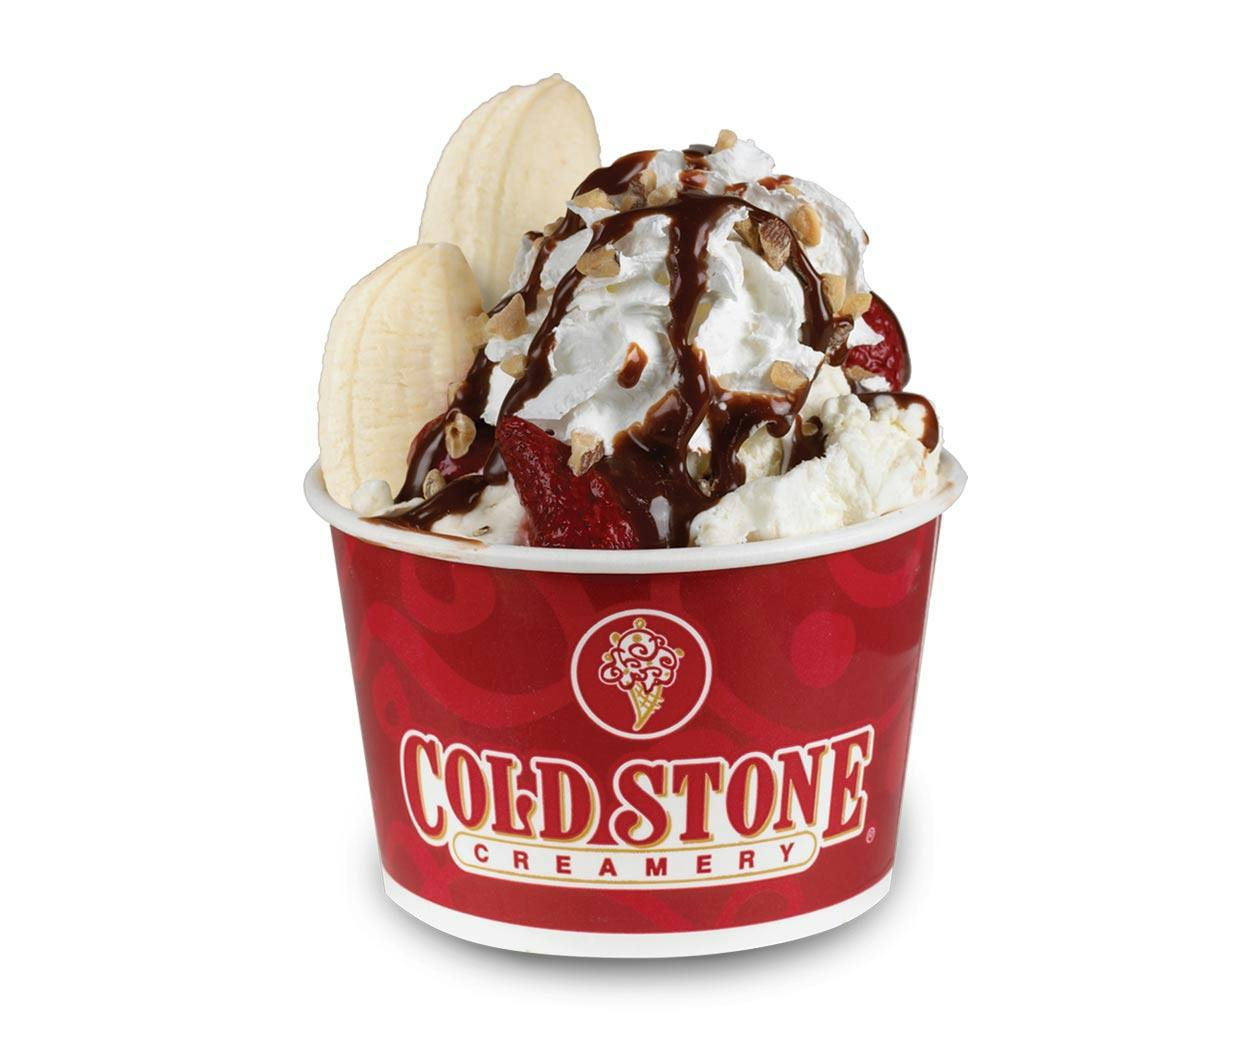 Banana Split Decision from Cold Stone Creamery - Green Bay in Green Bay, WI